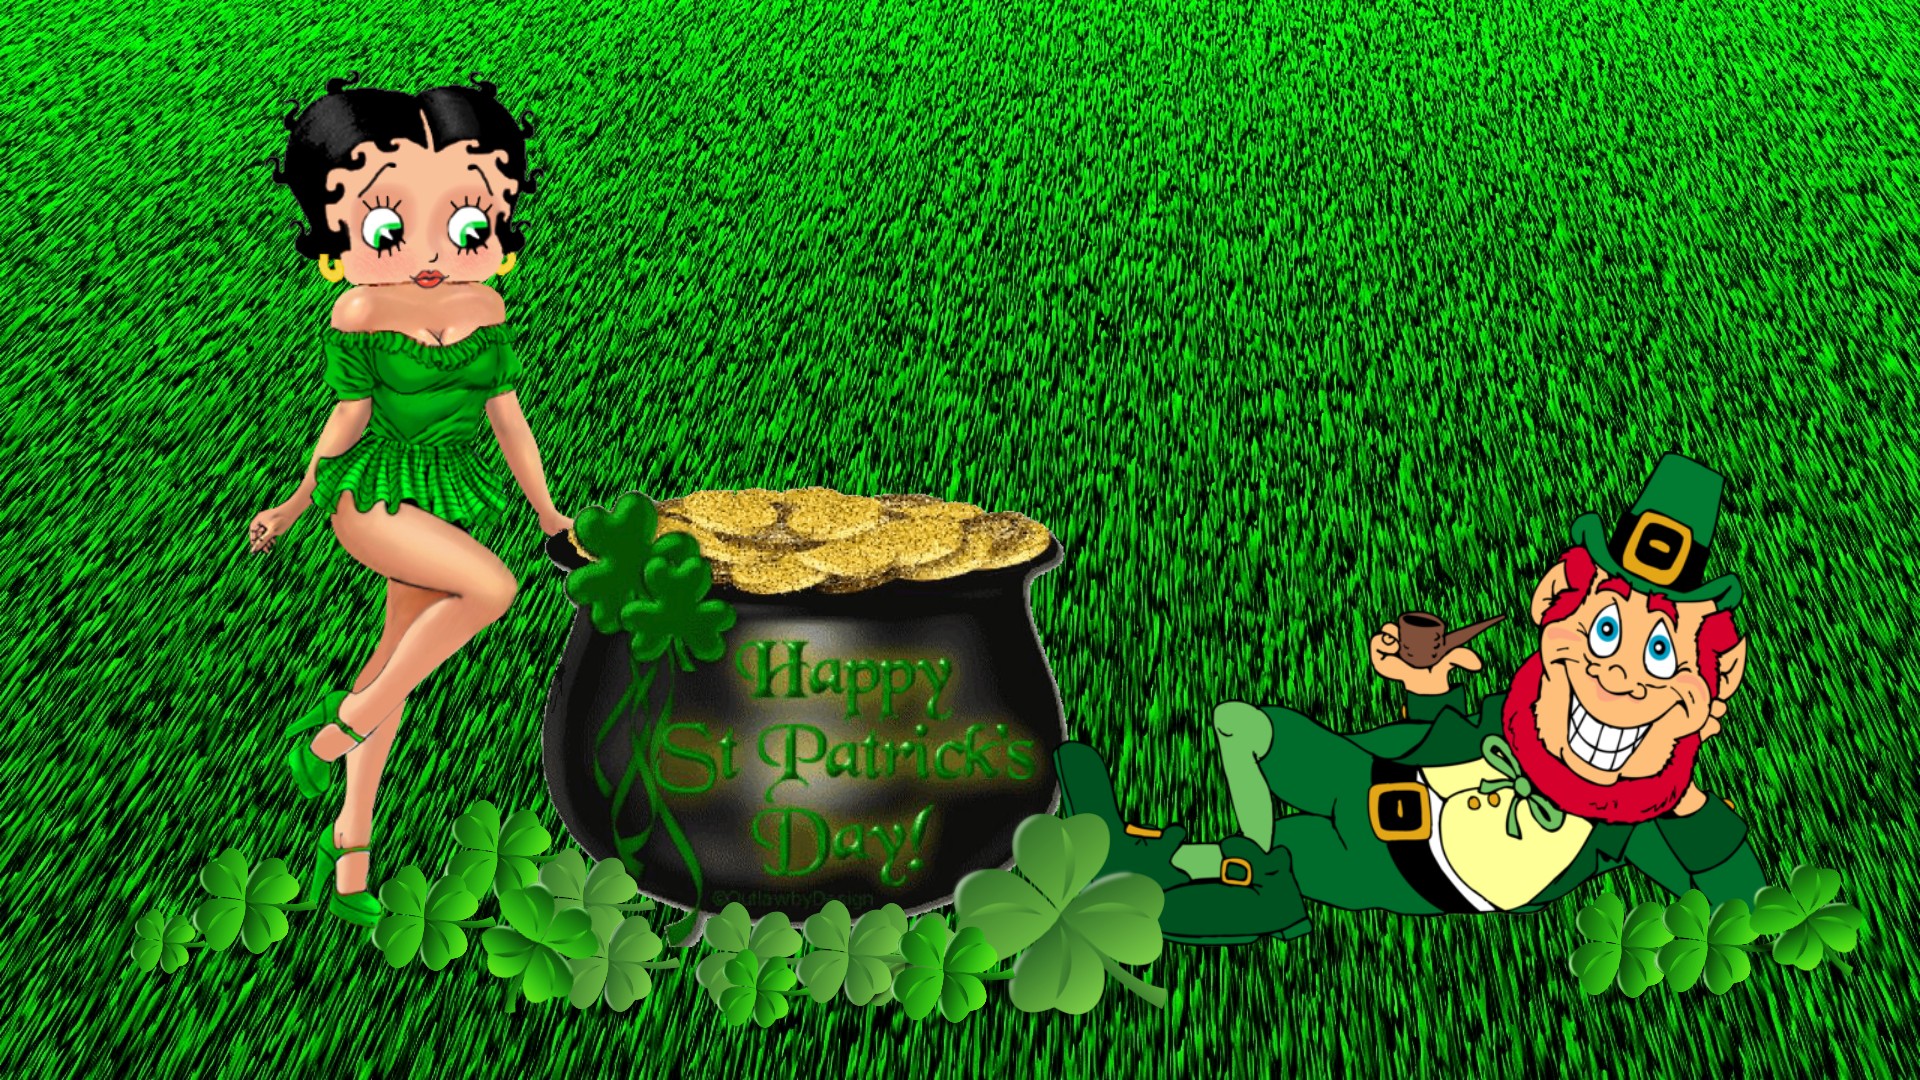 St. Patrick's Day Wallpapers Archives - USA Festival Holidays